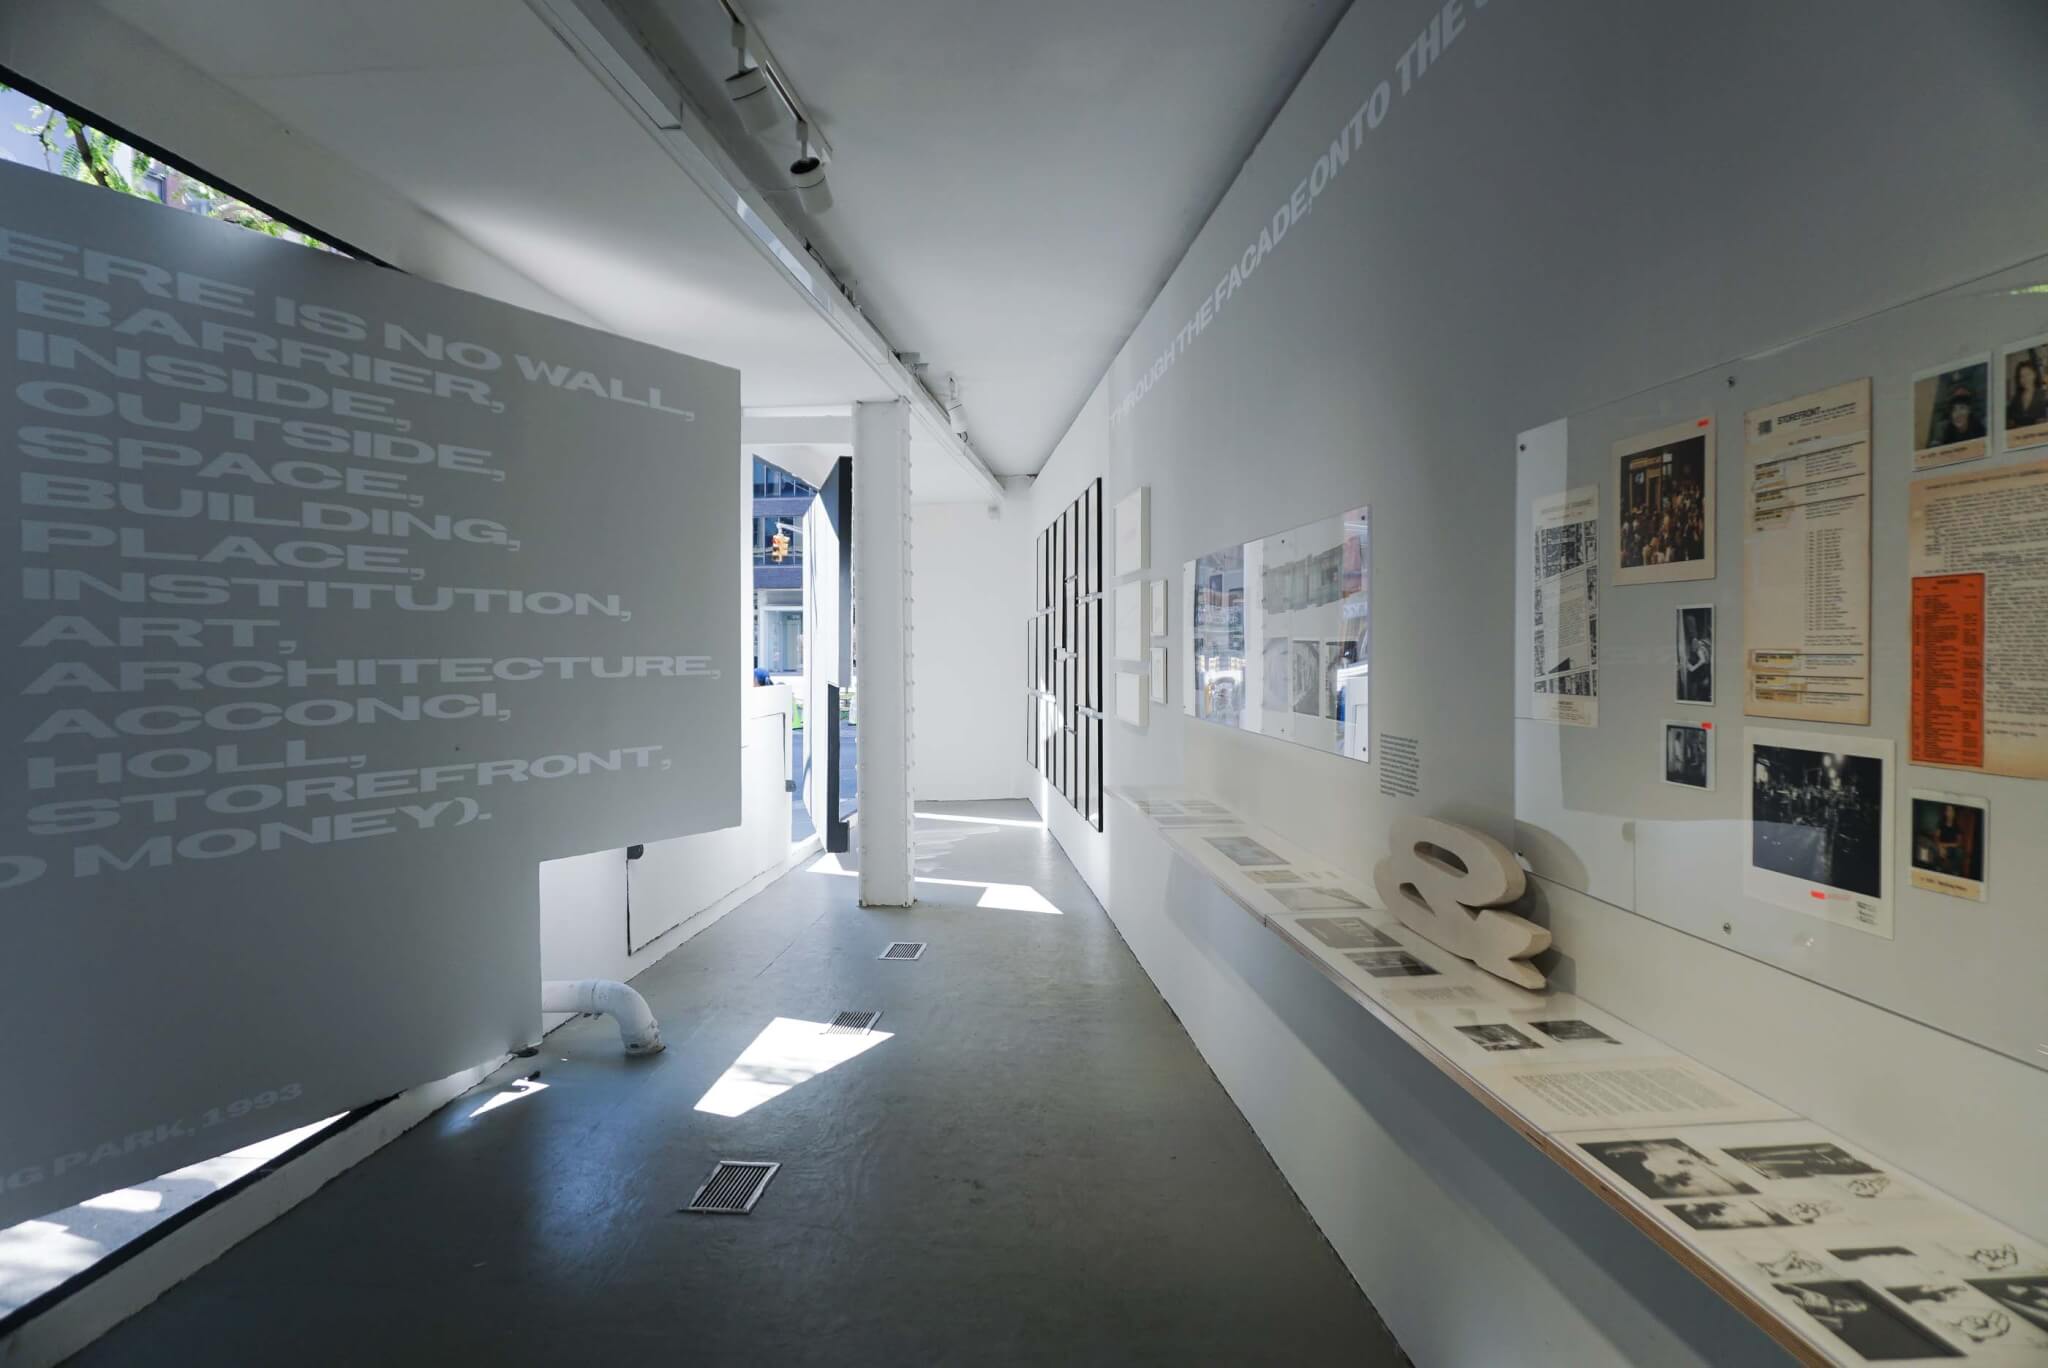 view of exhibition space